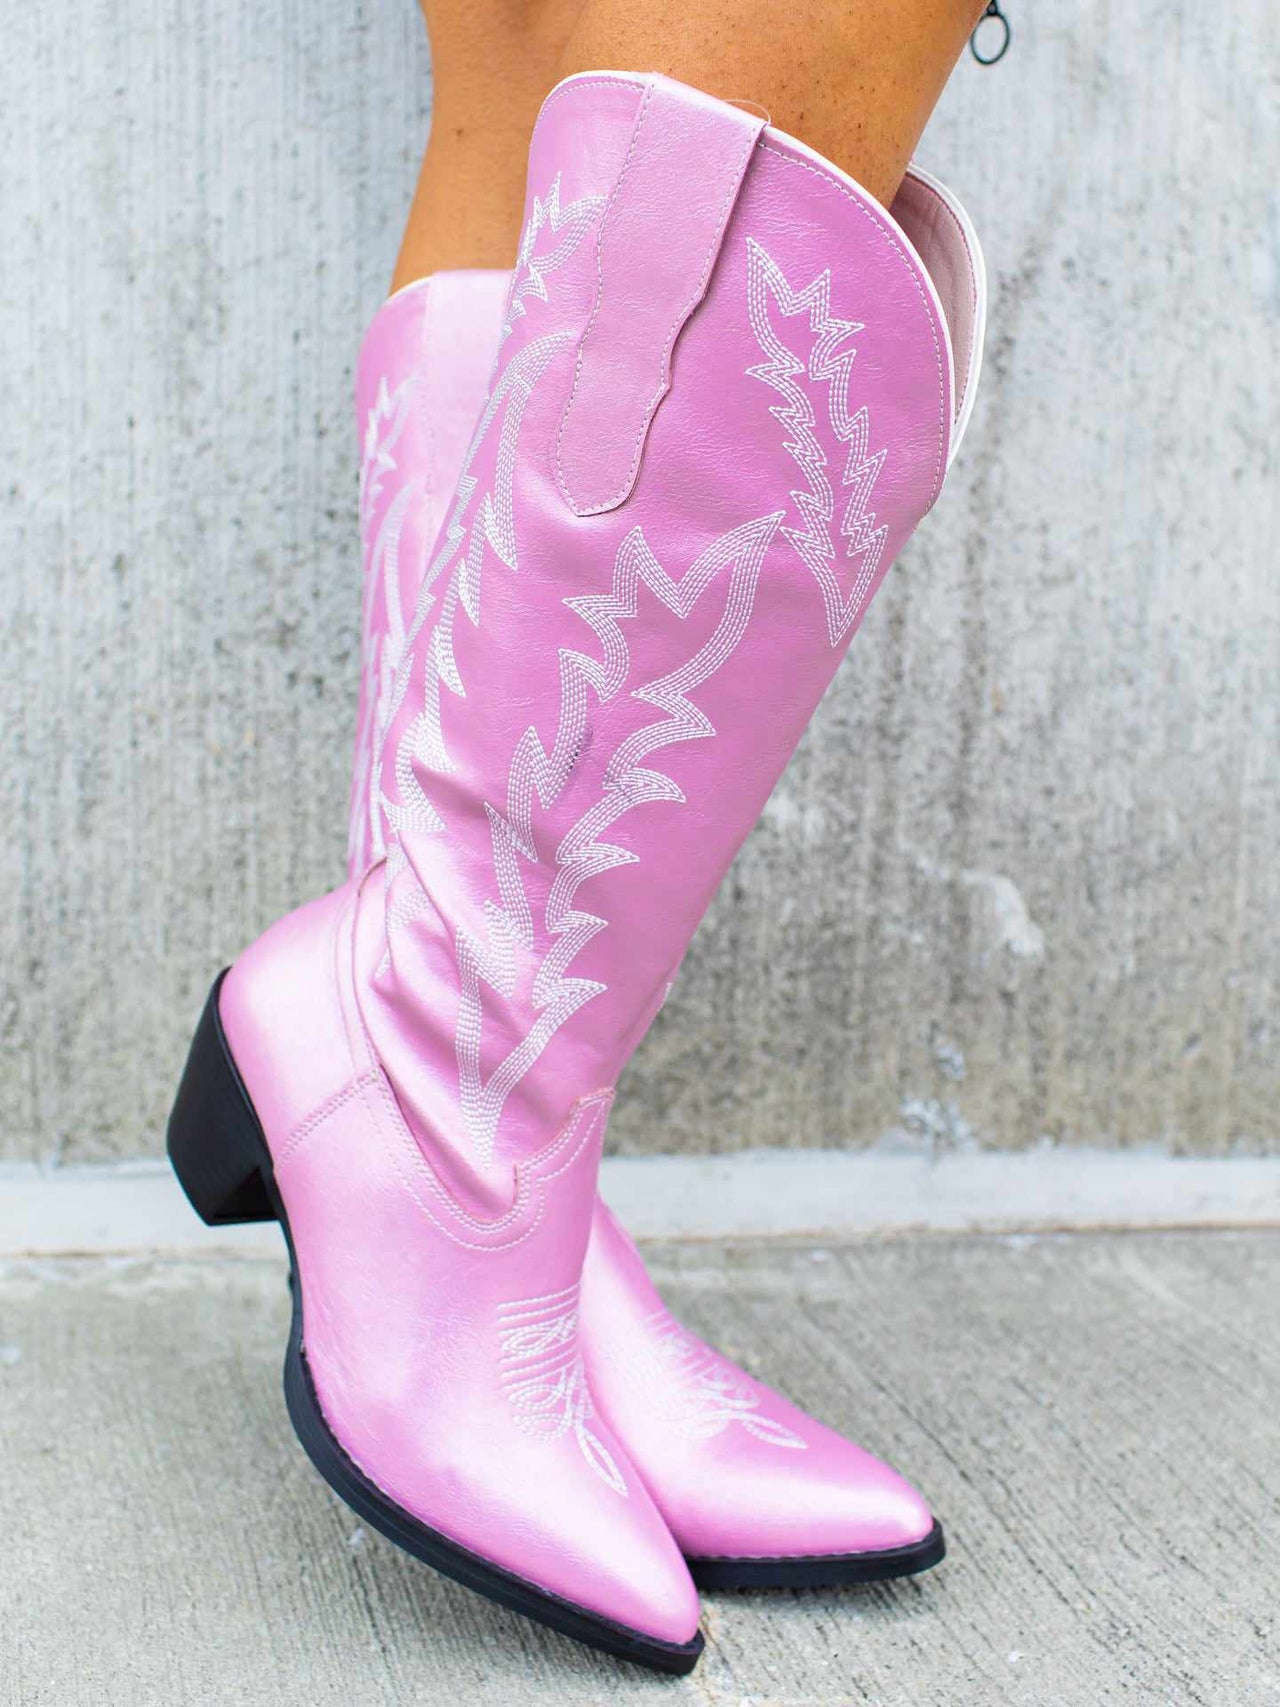 Light pink western cowgirl boots.